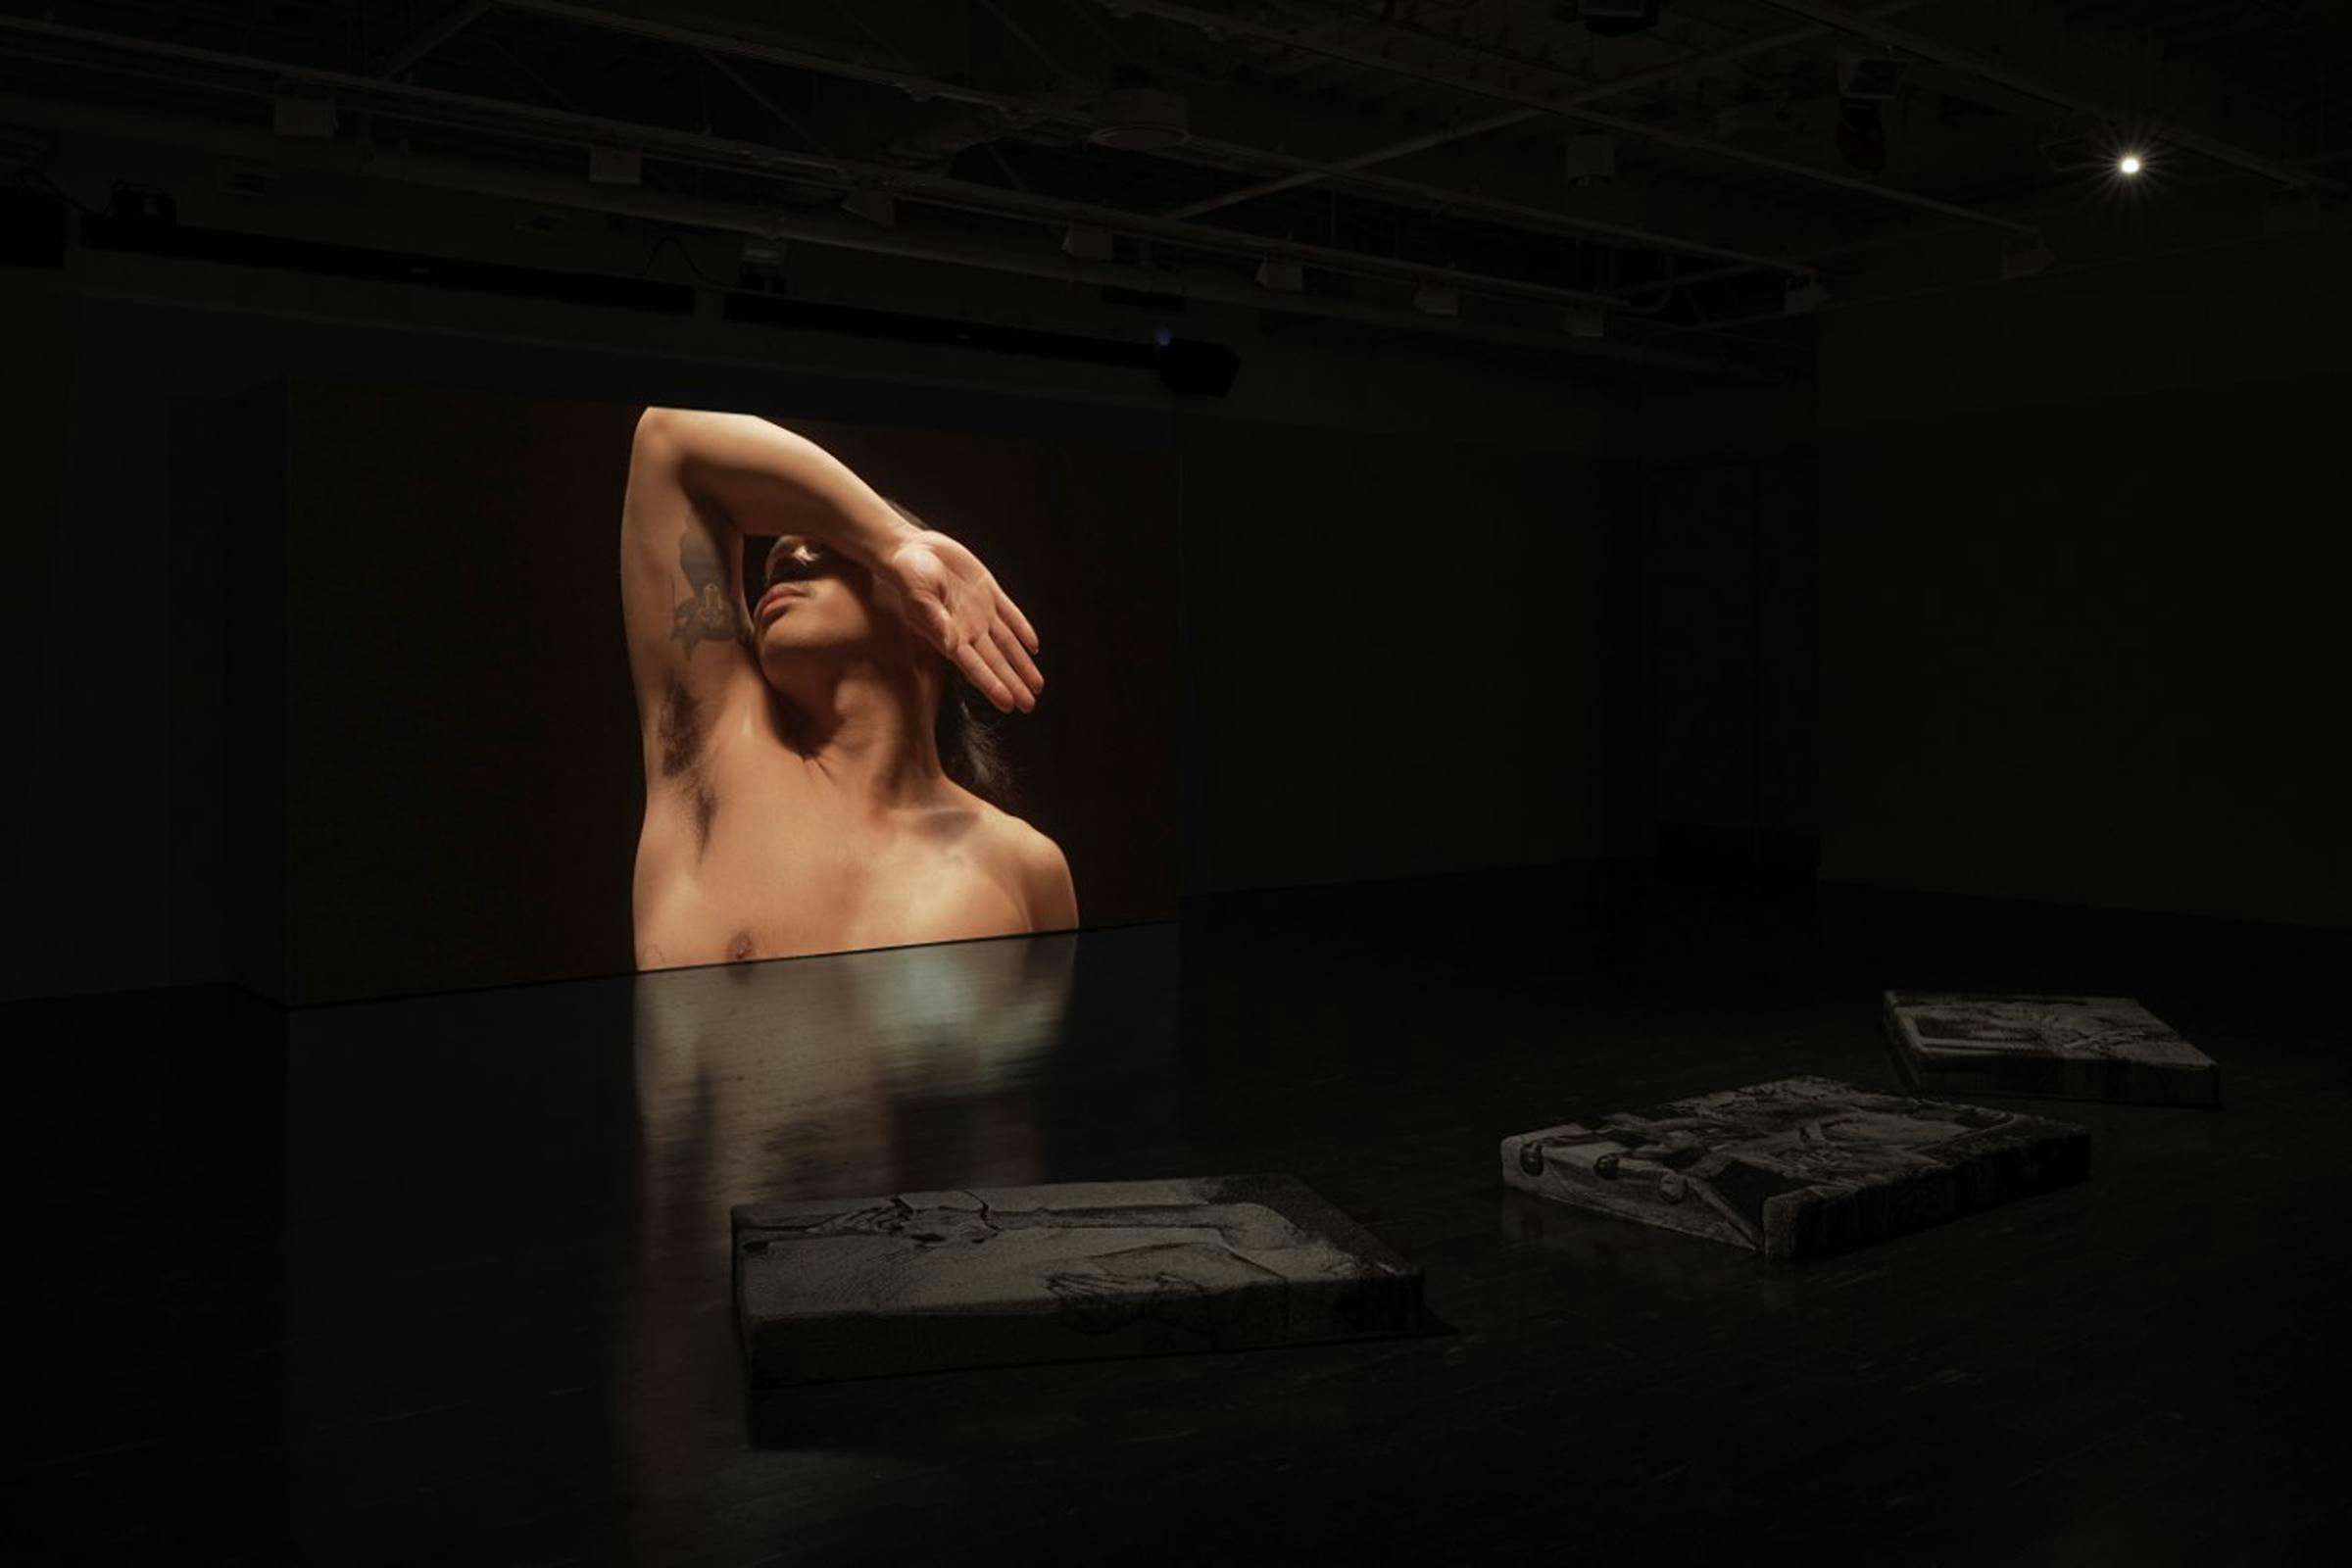 Installation view of The Heart of a hand in a darkened space. The image projected is of a shirtless person standing in a black space with their arm over their face.